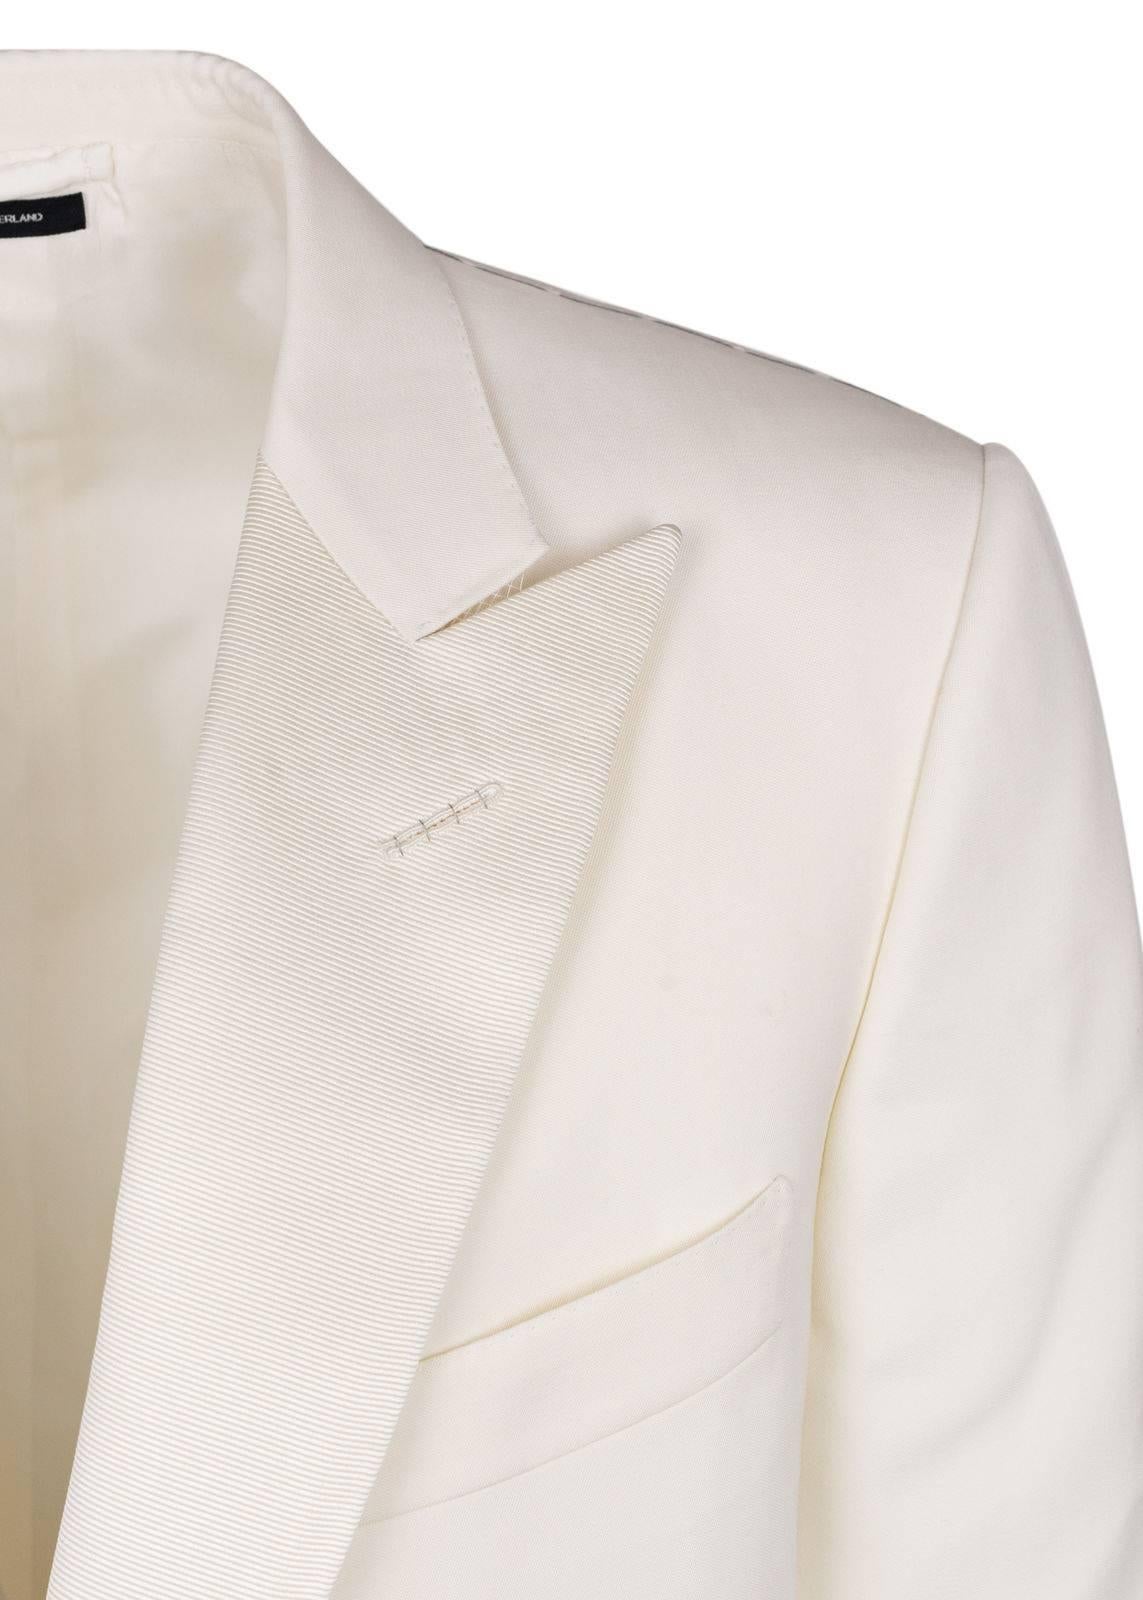 Tom Ford designed this outstanding O'Connor Jacket for that special occasion.This cocktail jacket features a textured peak lapel, single button closure, and a rich blend of mohair. You can pair this cocktail jacket with dark streamlined slacks and